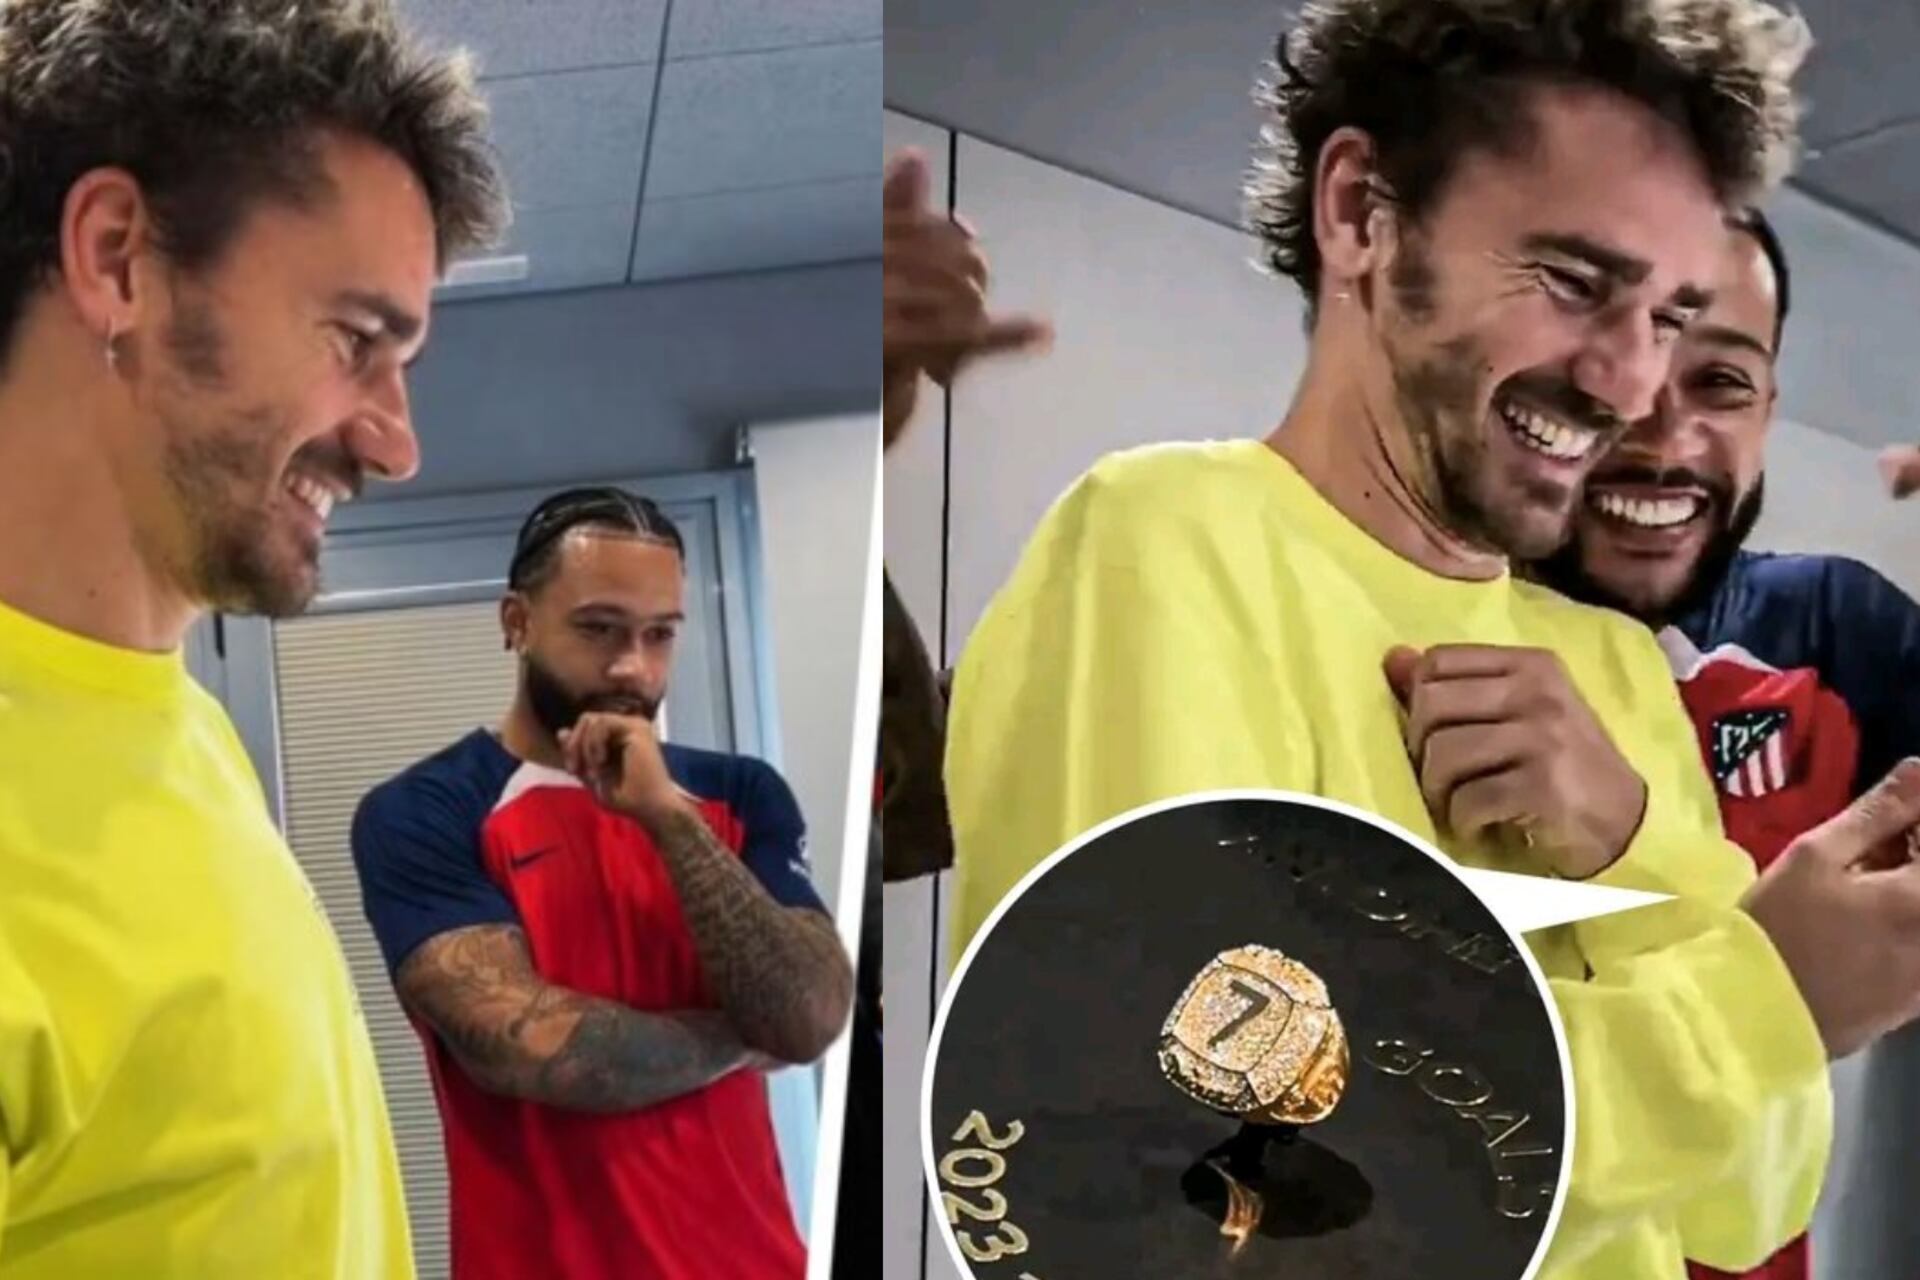 A luxury, what the NBA-style ring that Depay gave to Antoine Griezmann costs